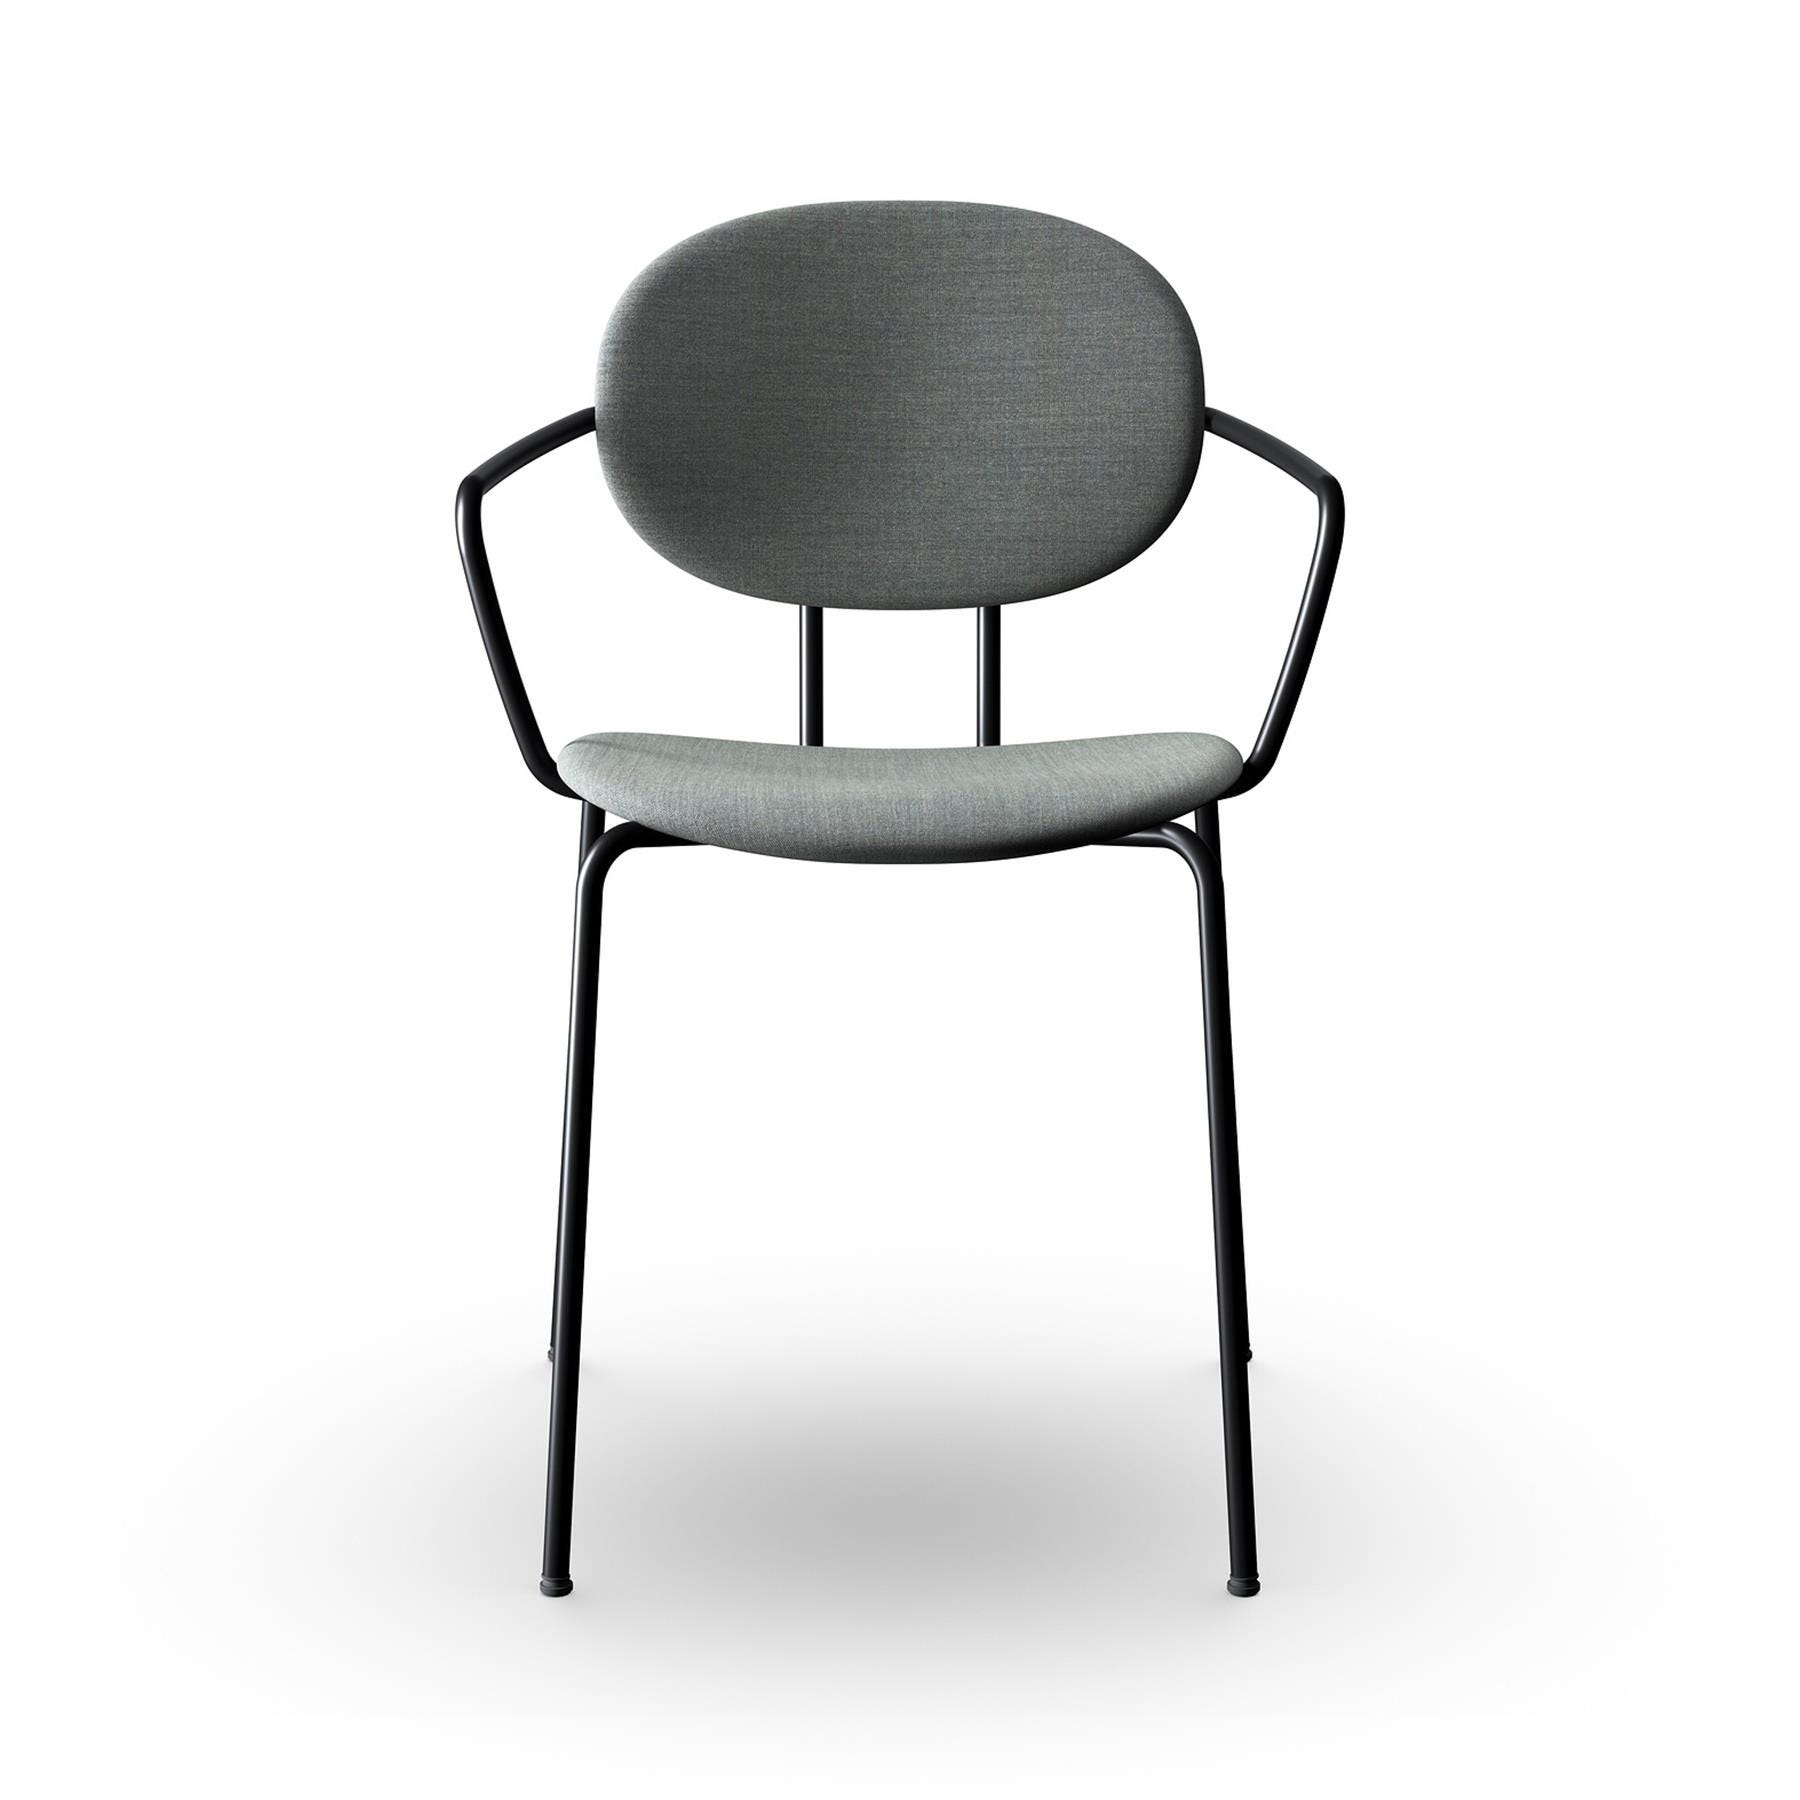 Sibast Piet Hein Dining Chair Fully Upholstered With Arms Black Steel Remix 133 Grey Designer Furniture From Holloways Of Ludlow